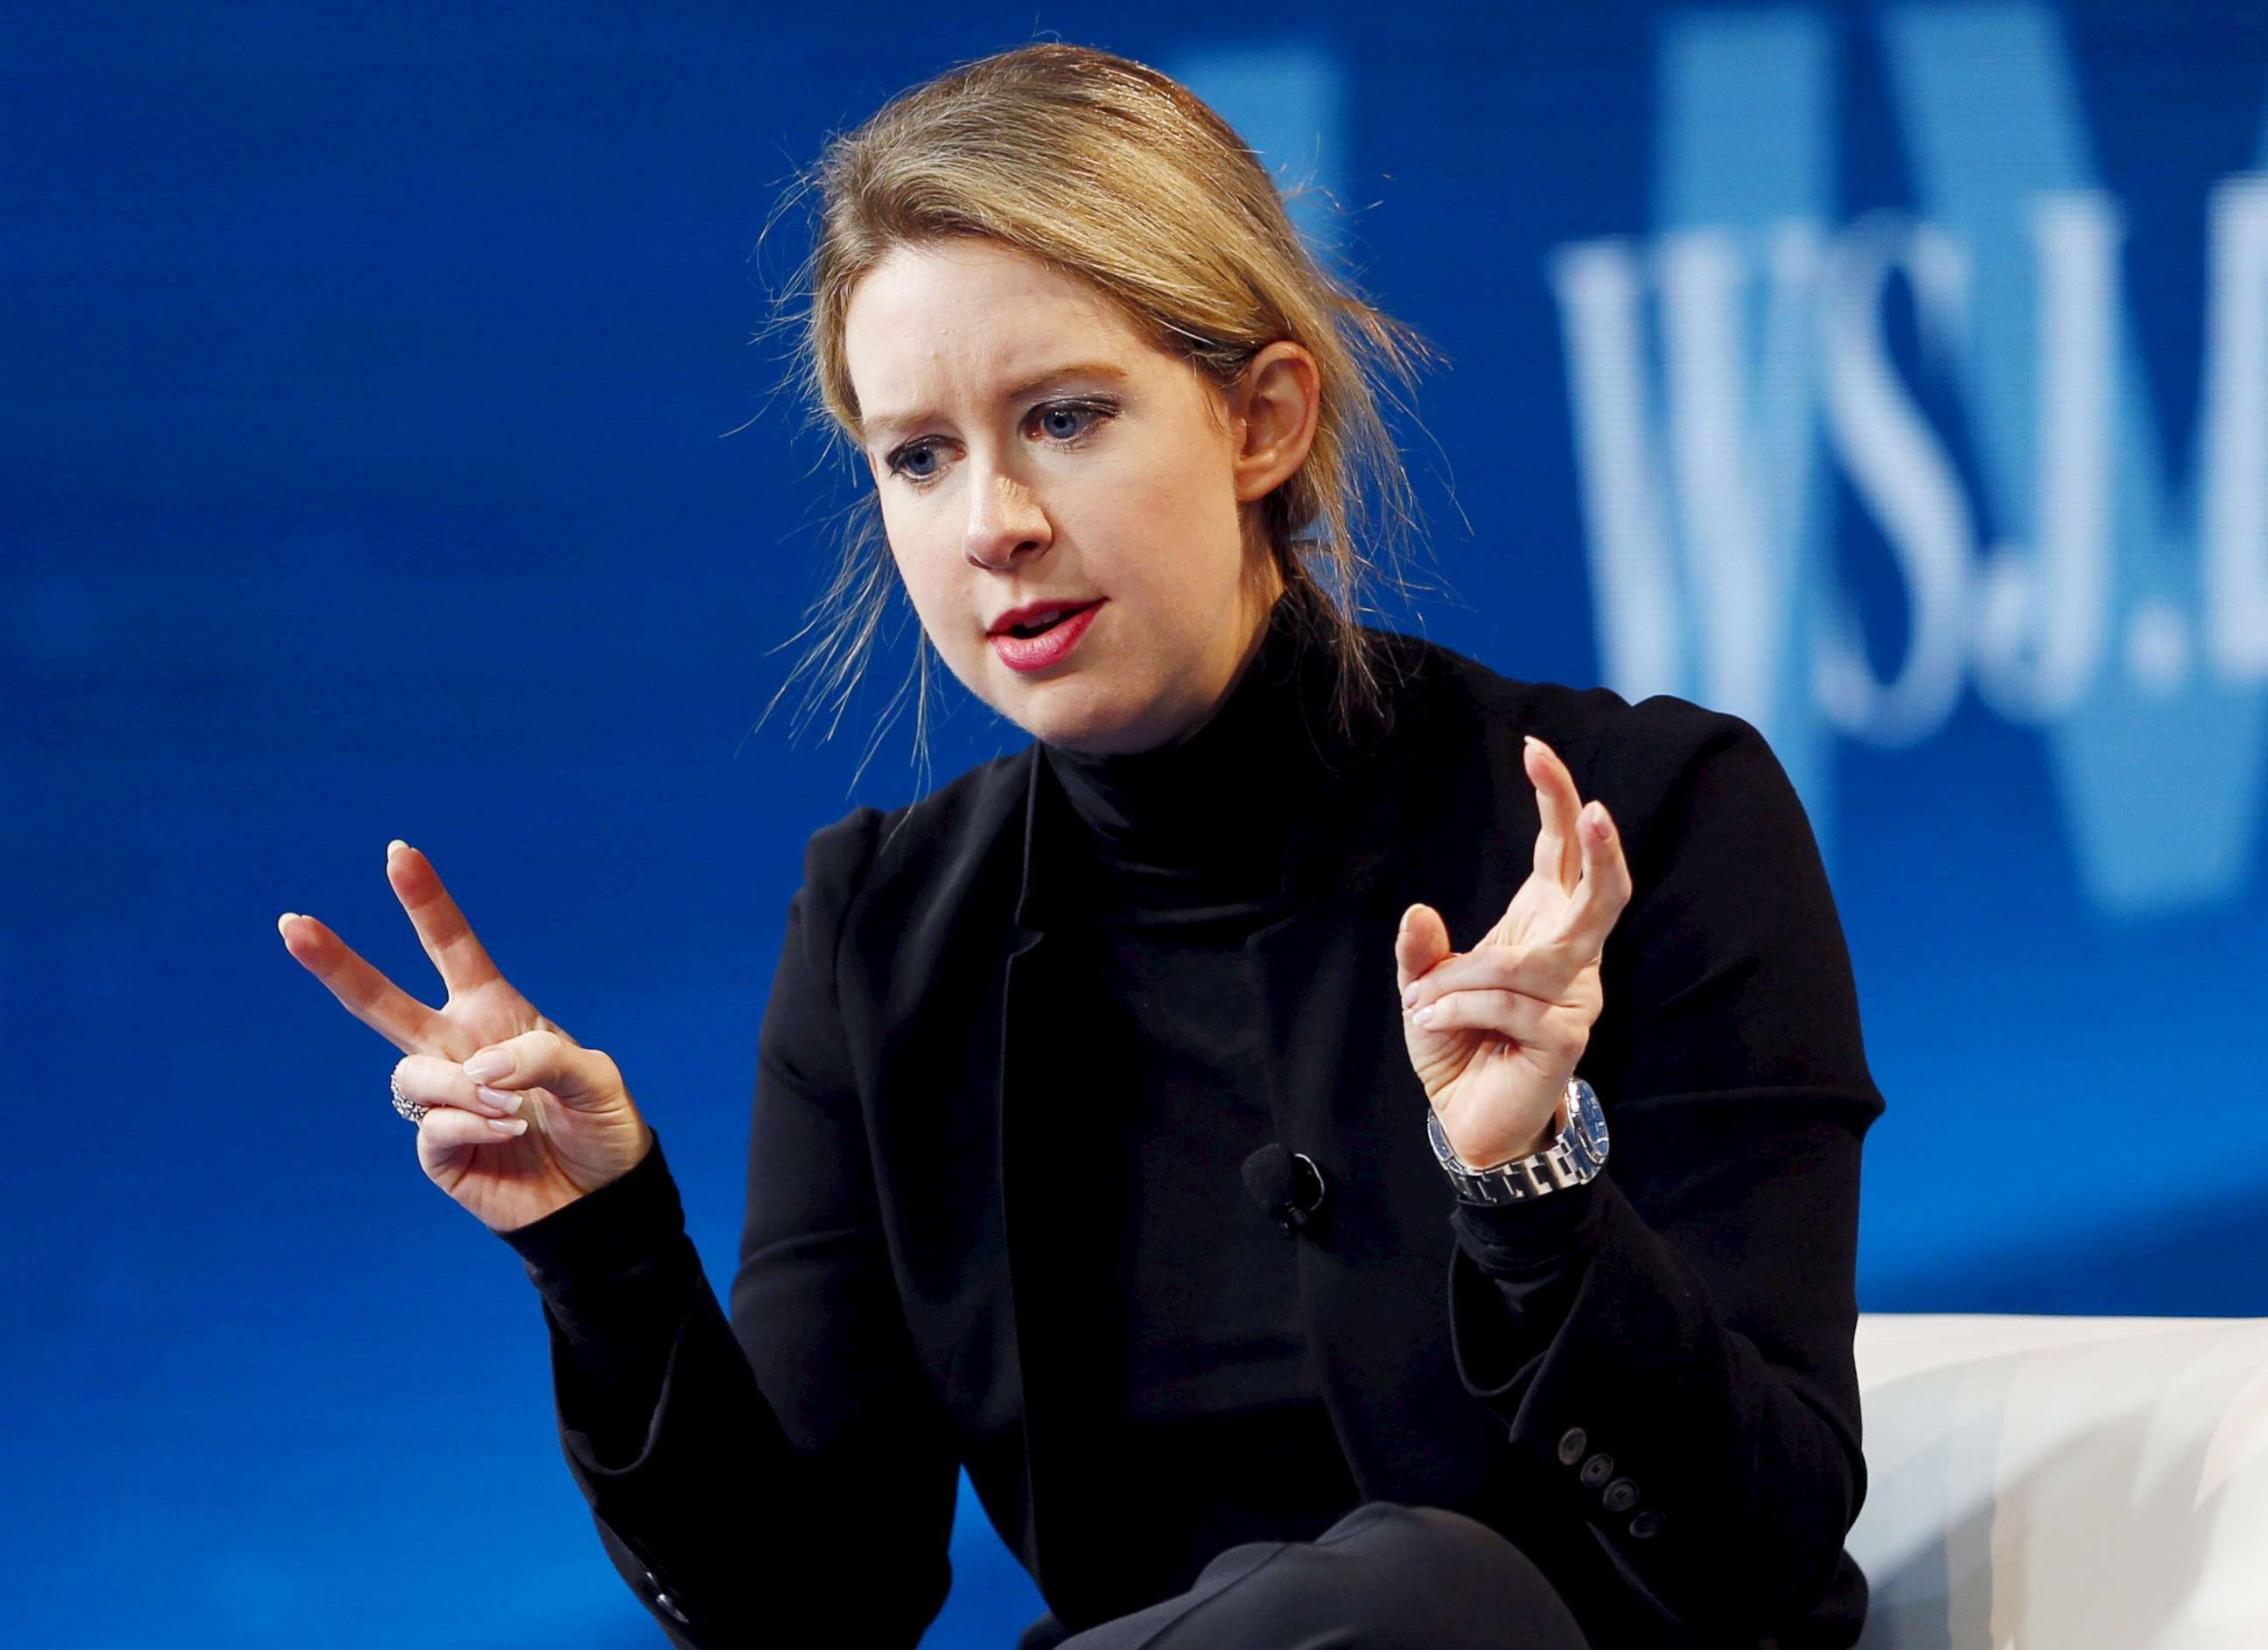 PHOTO: Elizabeth Holmes, founder and CEO of Theranos, speaks at a conference at the Montage hotel in Laguna Beach, Calif., in this Oct. 21, 2015. 